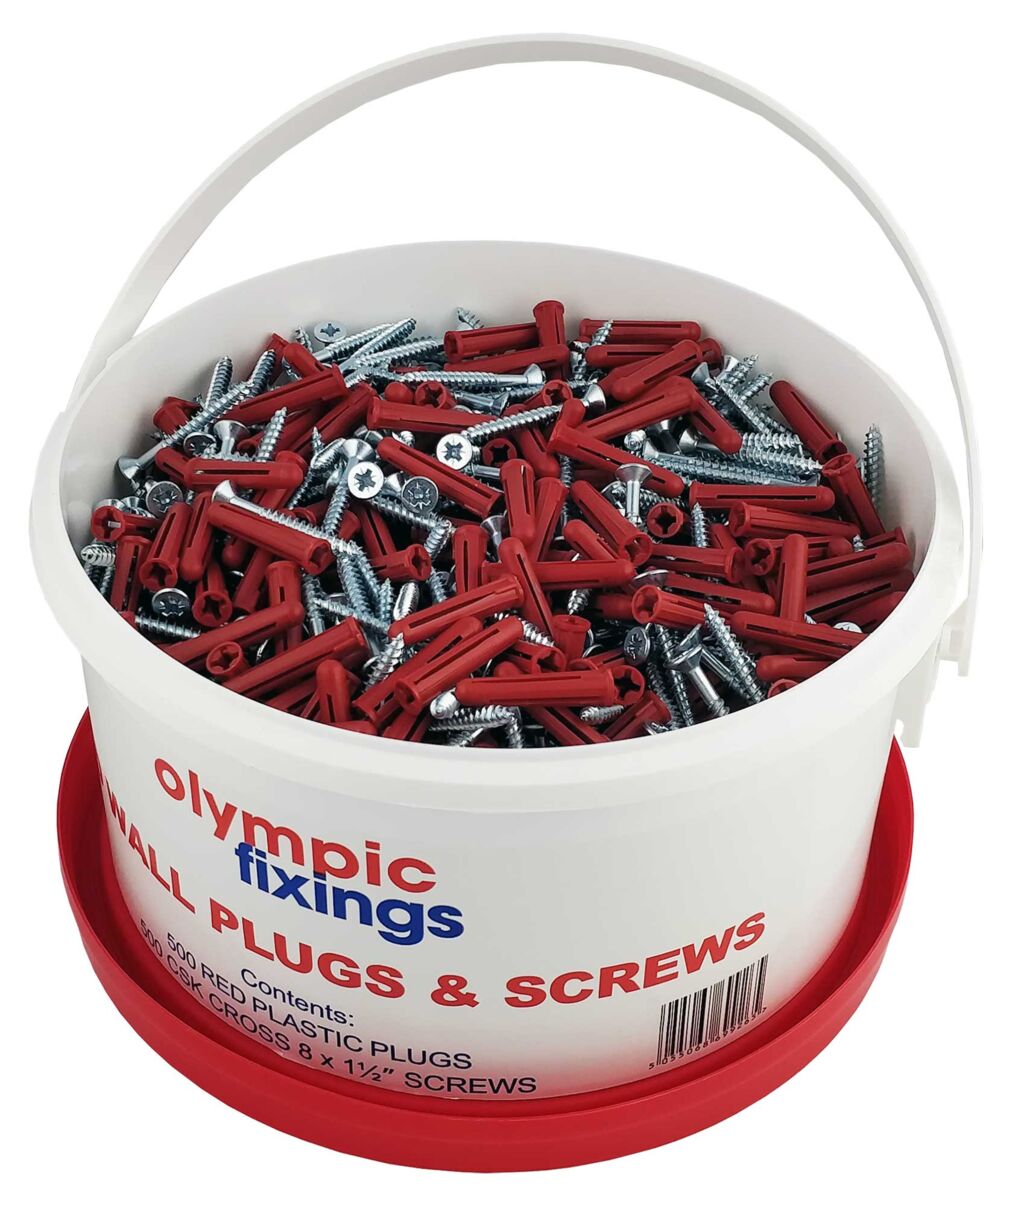 Olympic Red Wall Plugs and Screws Traders Tub